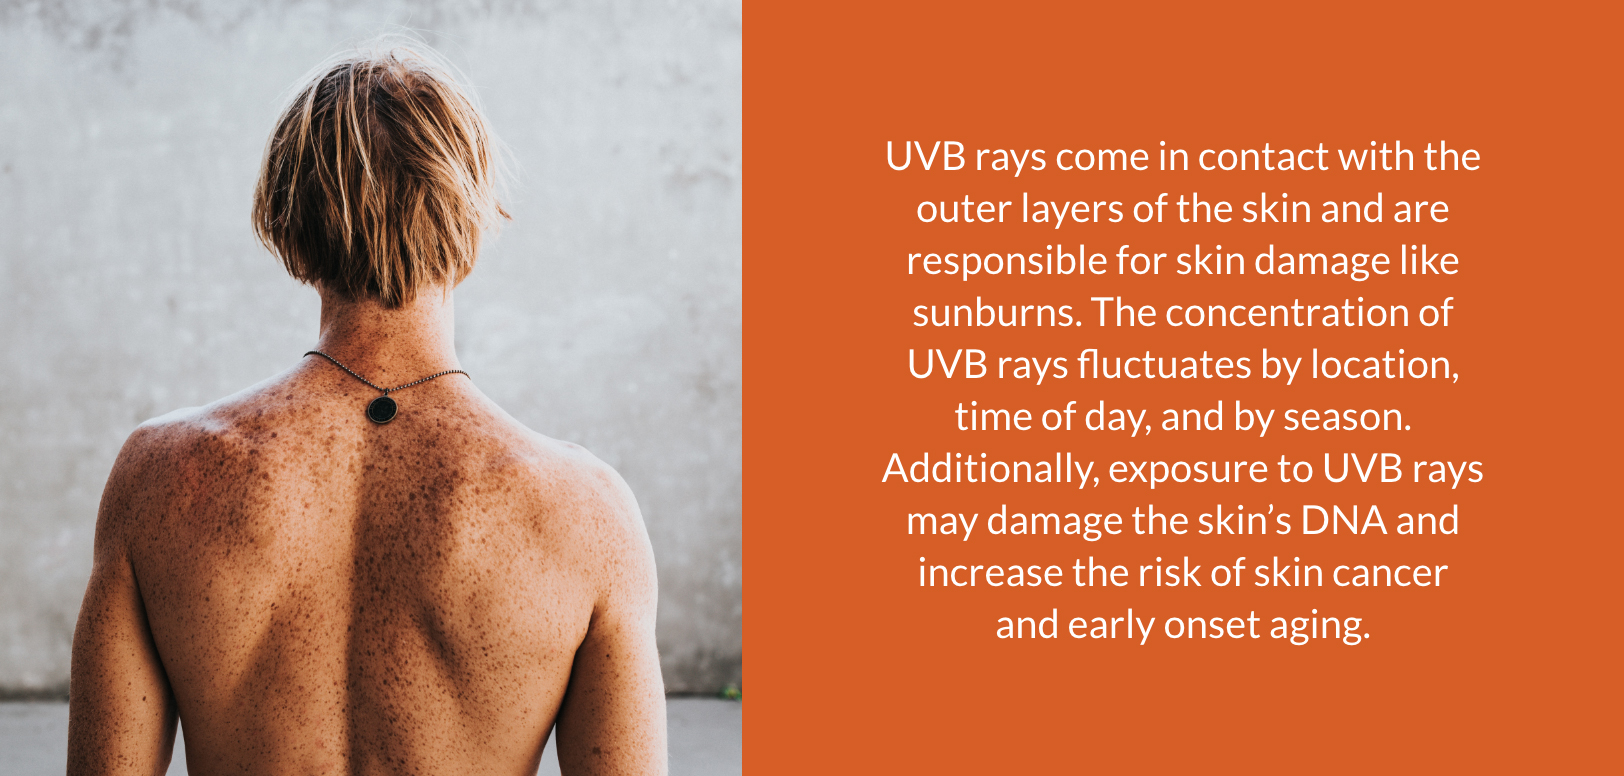 Sunscreen protects the skin from UVB rays.